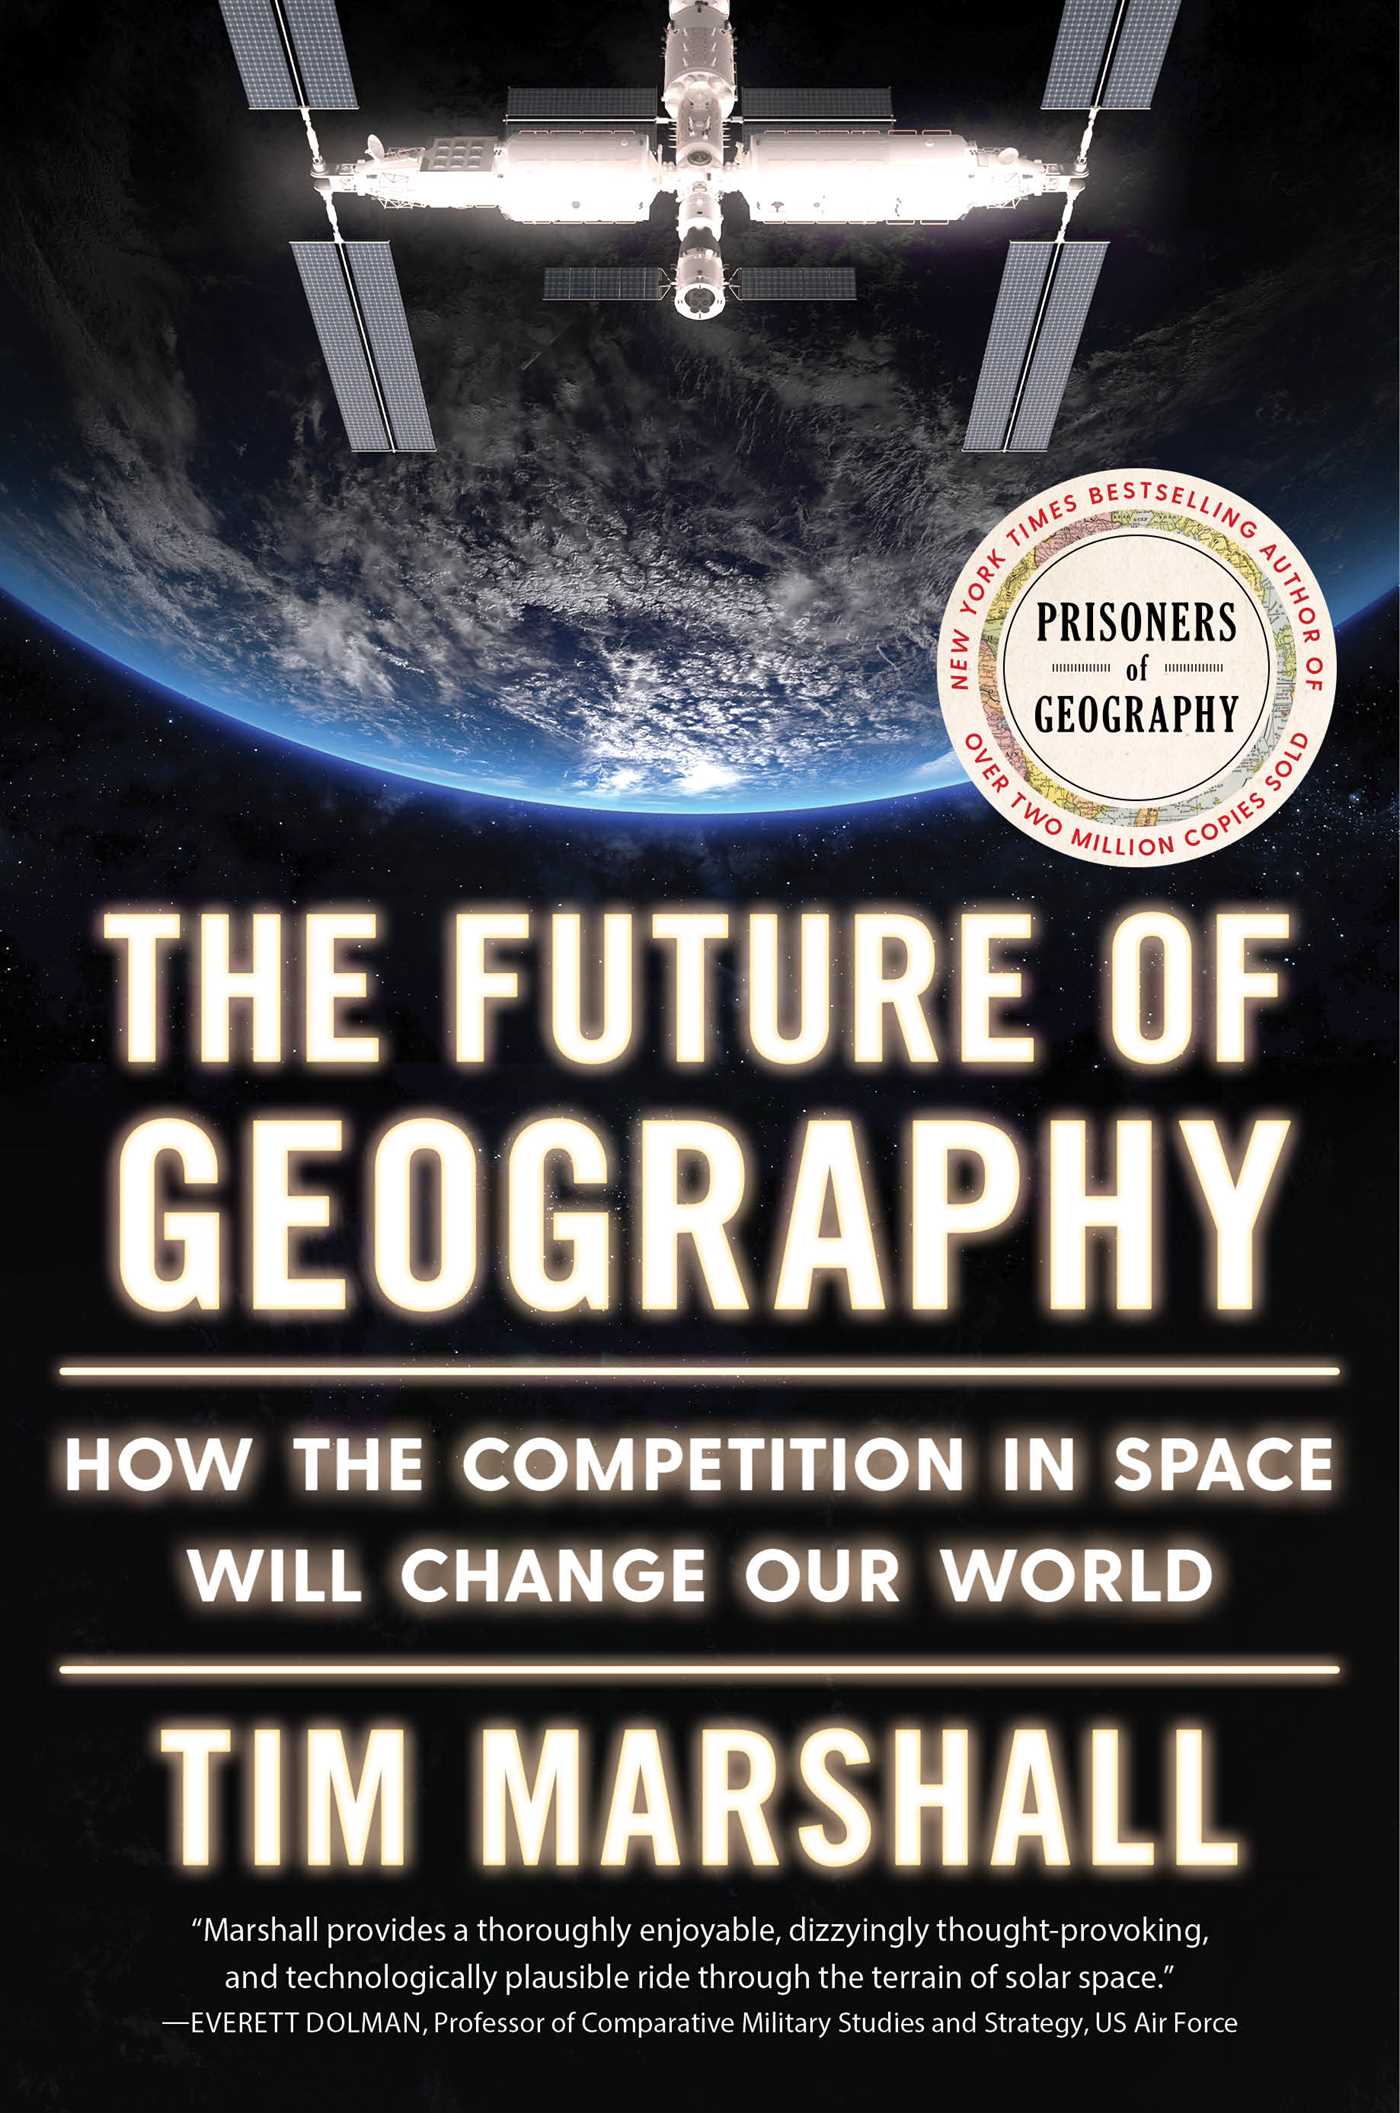 The Future of Geography